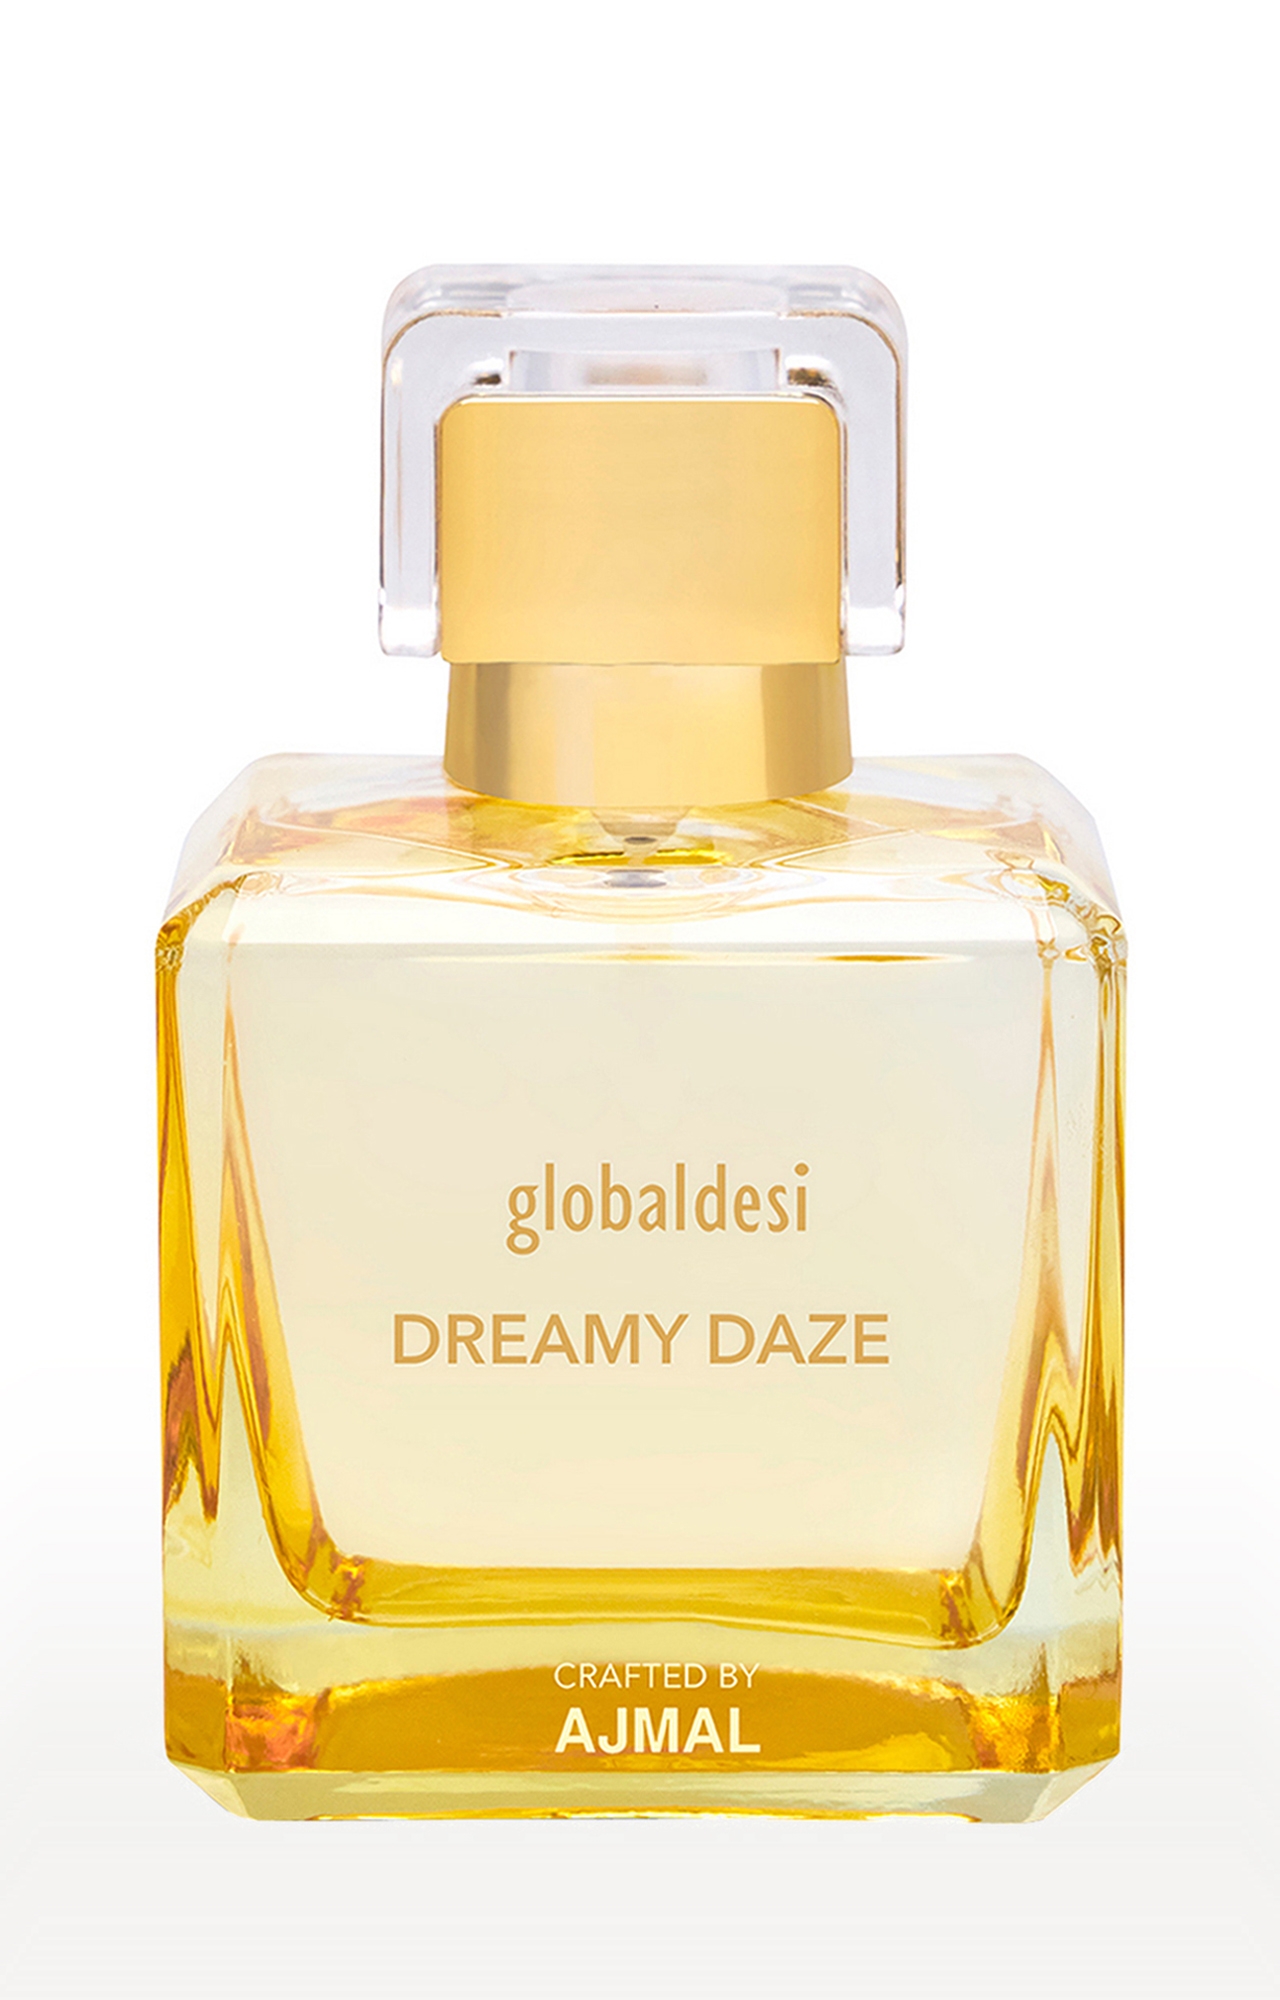 Global Desi Crafted By Ajmal | Global Desi Dreamy Daze Eau De Parfum 100ML Long Lasting Scent Spray Gift For Women Crafted By Ajmal 1